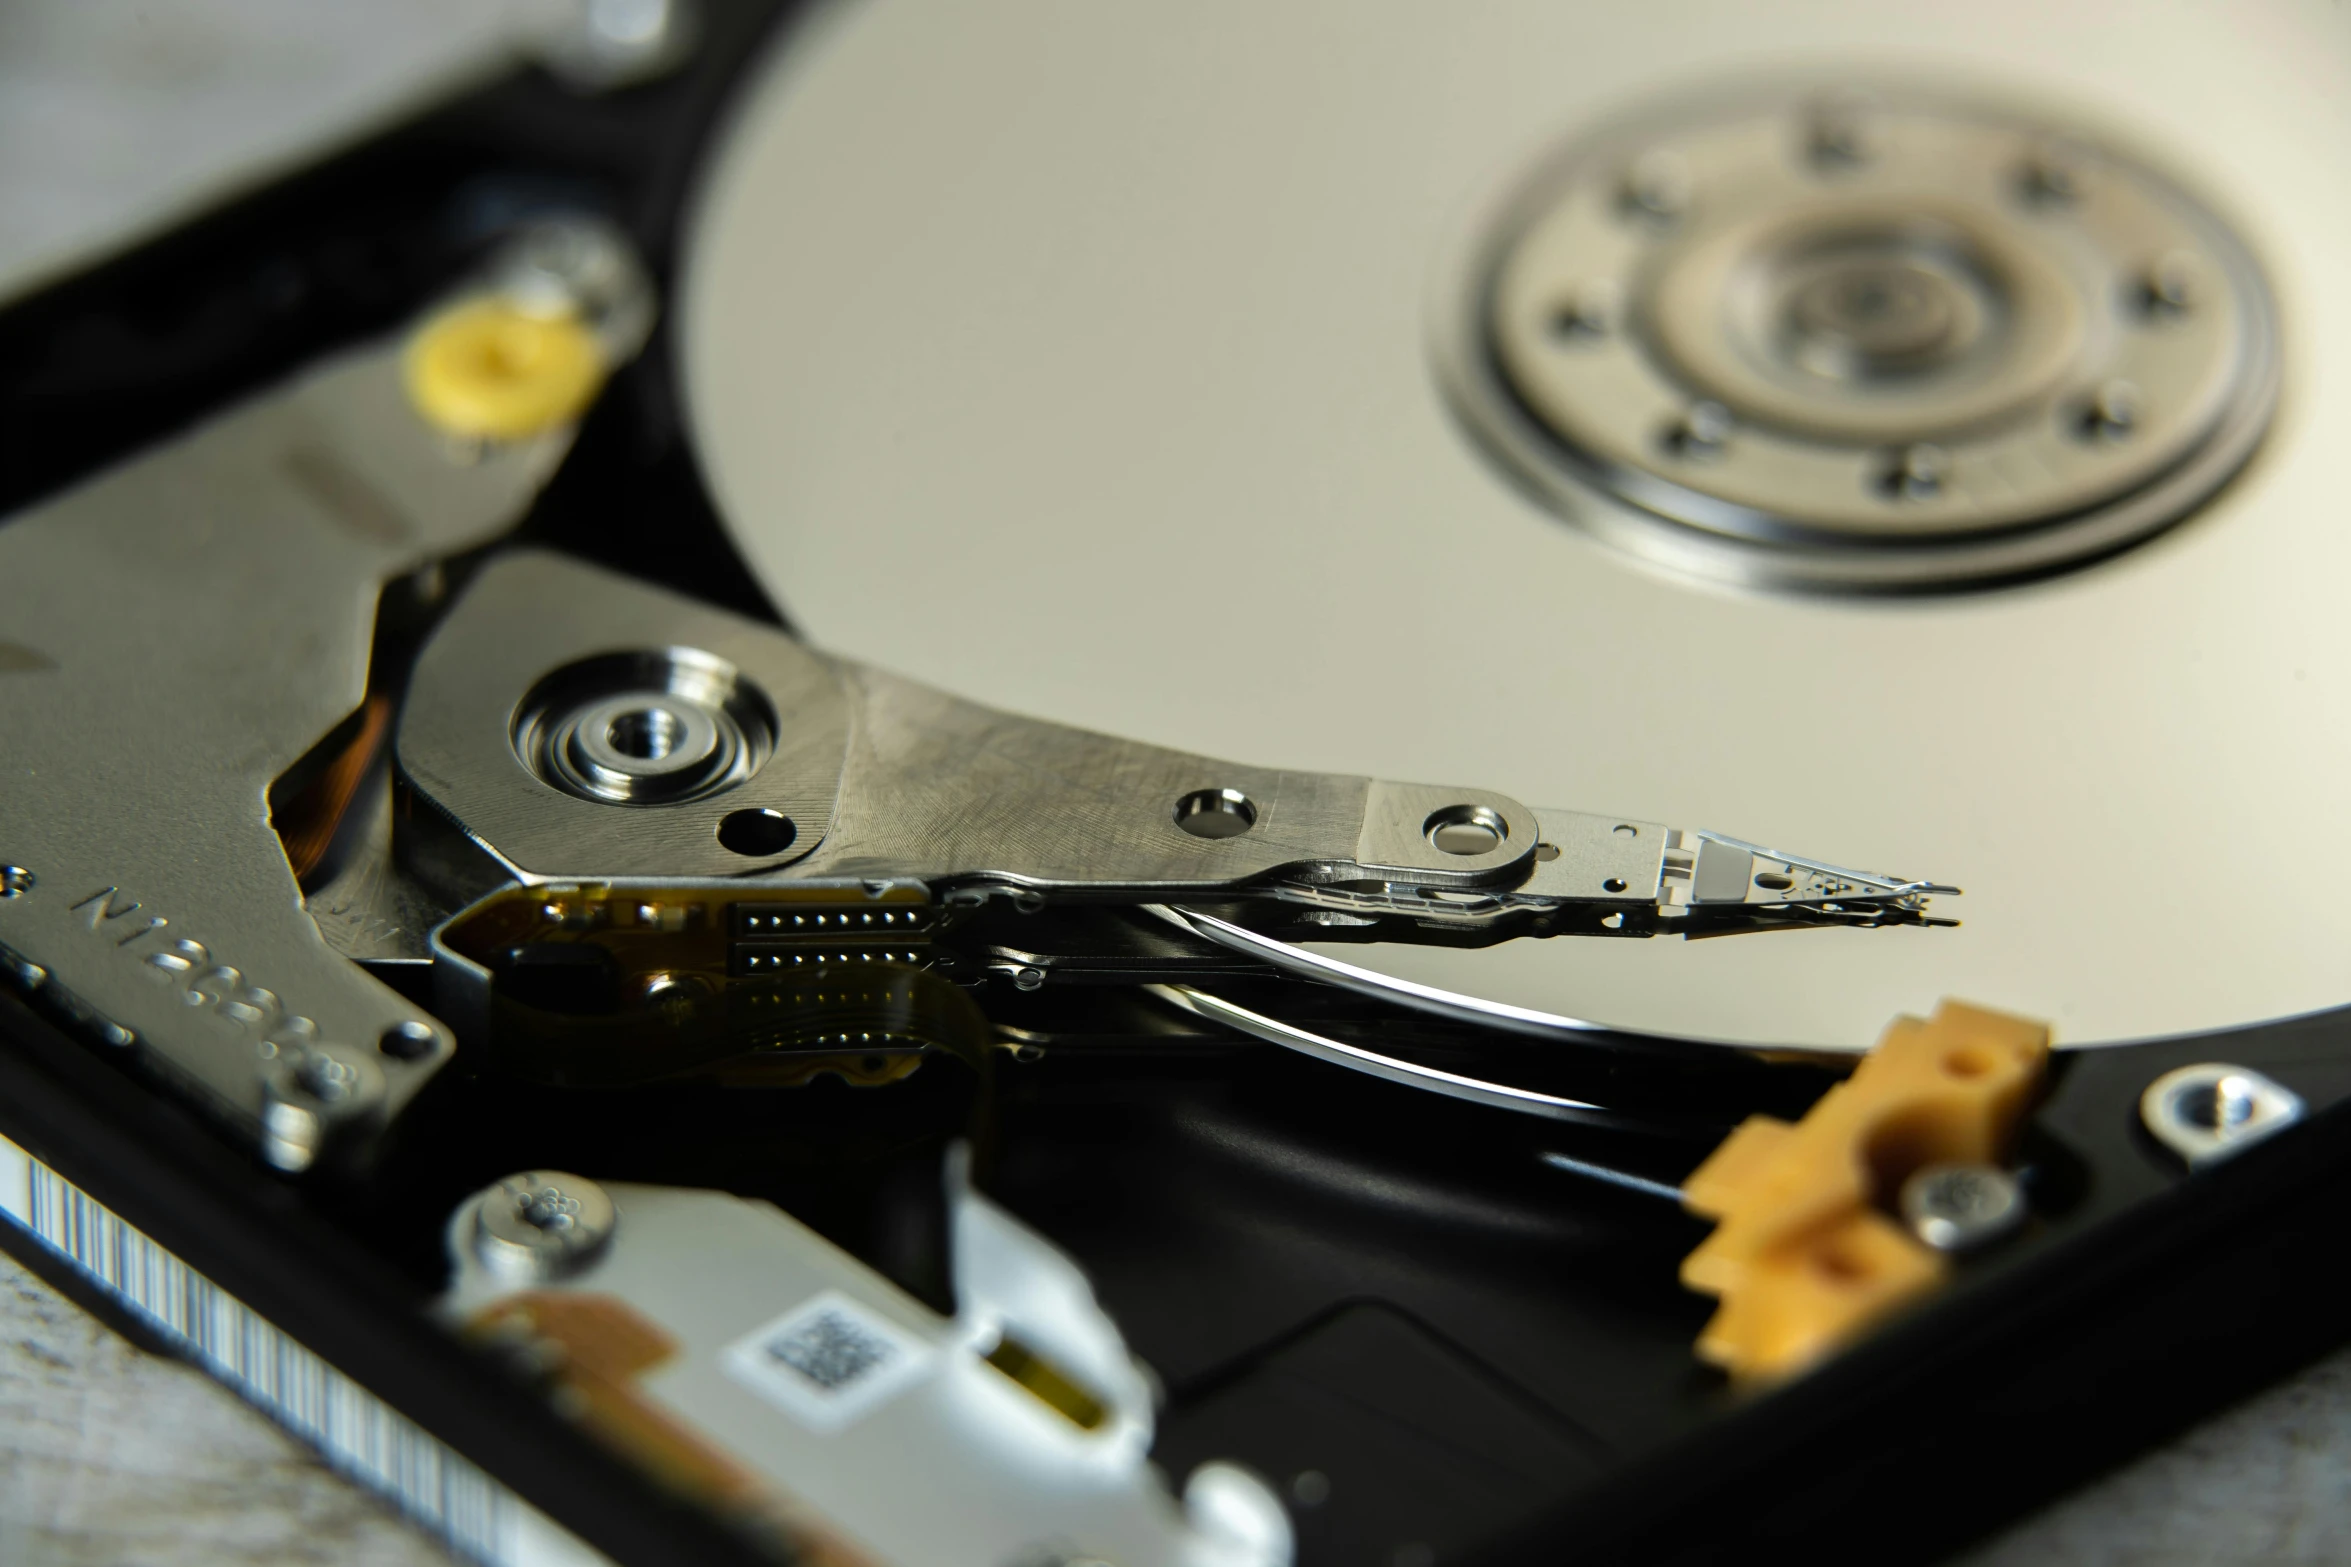 a hard disk drives out with several tools around it